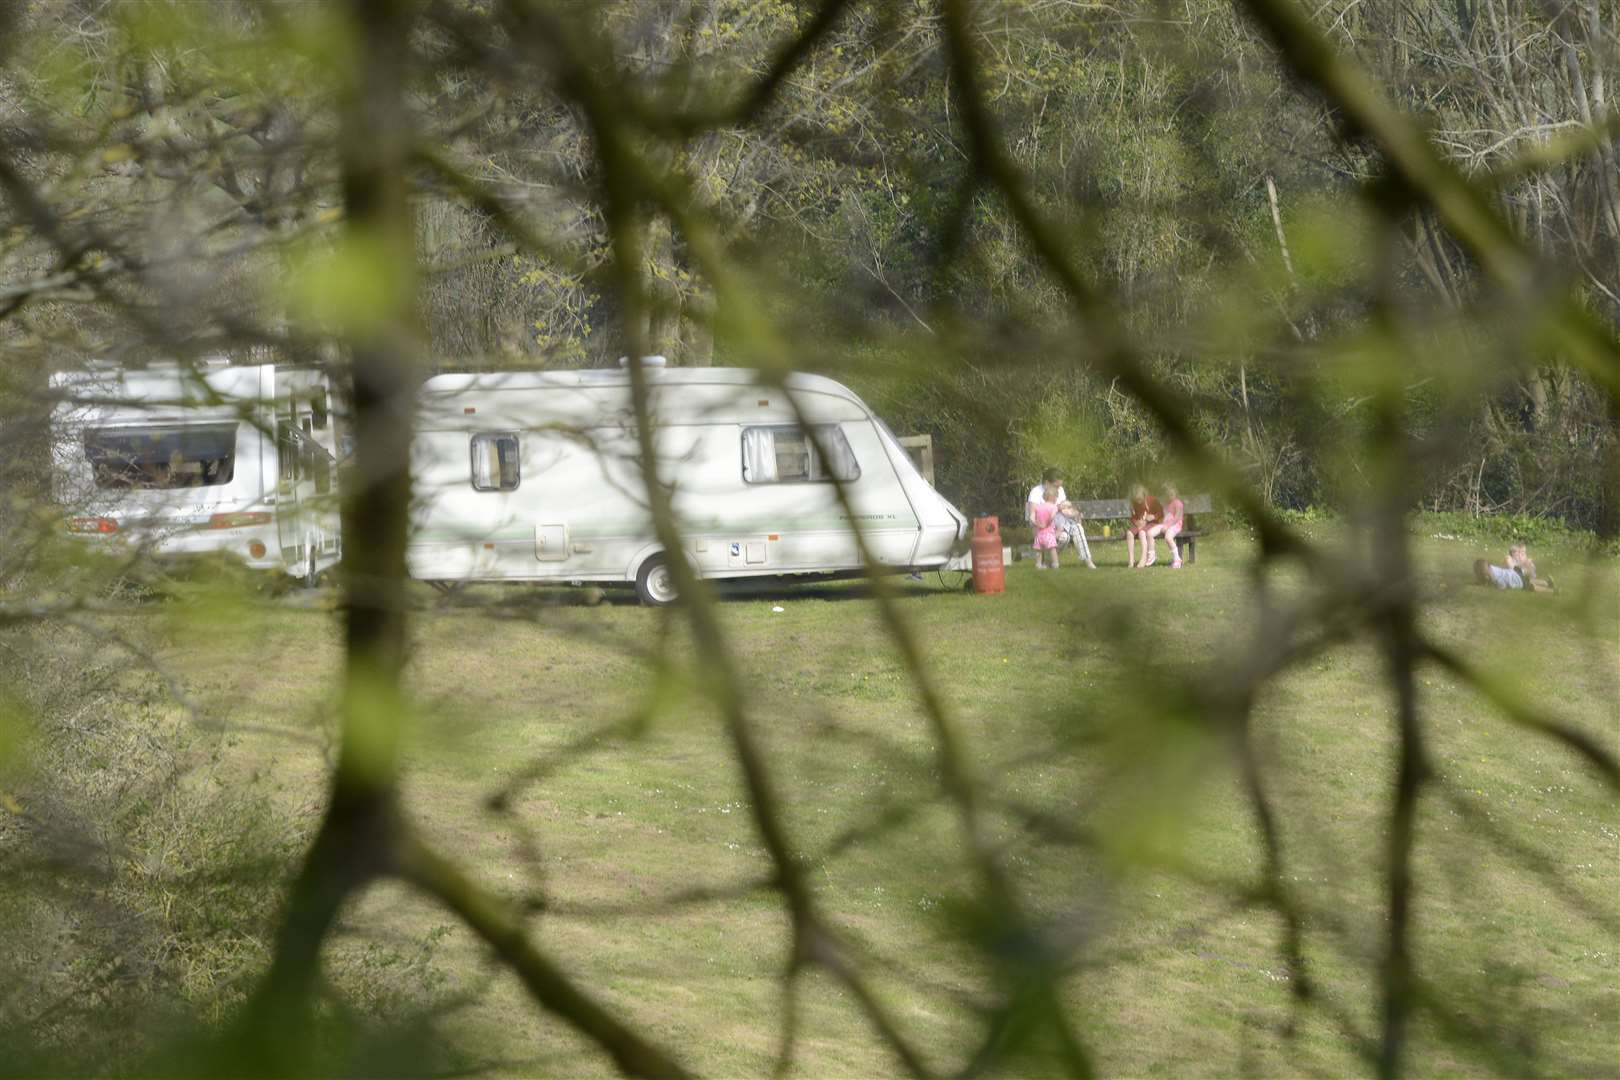 Travellers at Hythe Recreation ground last month